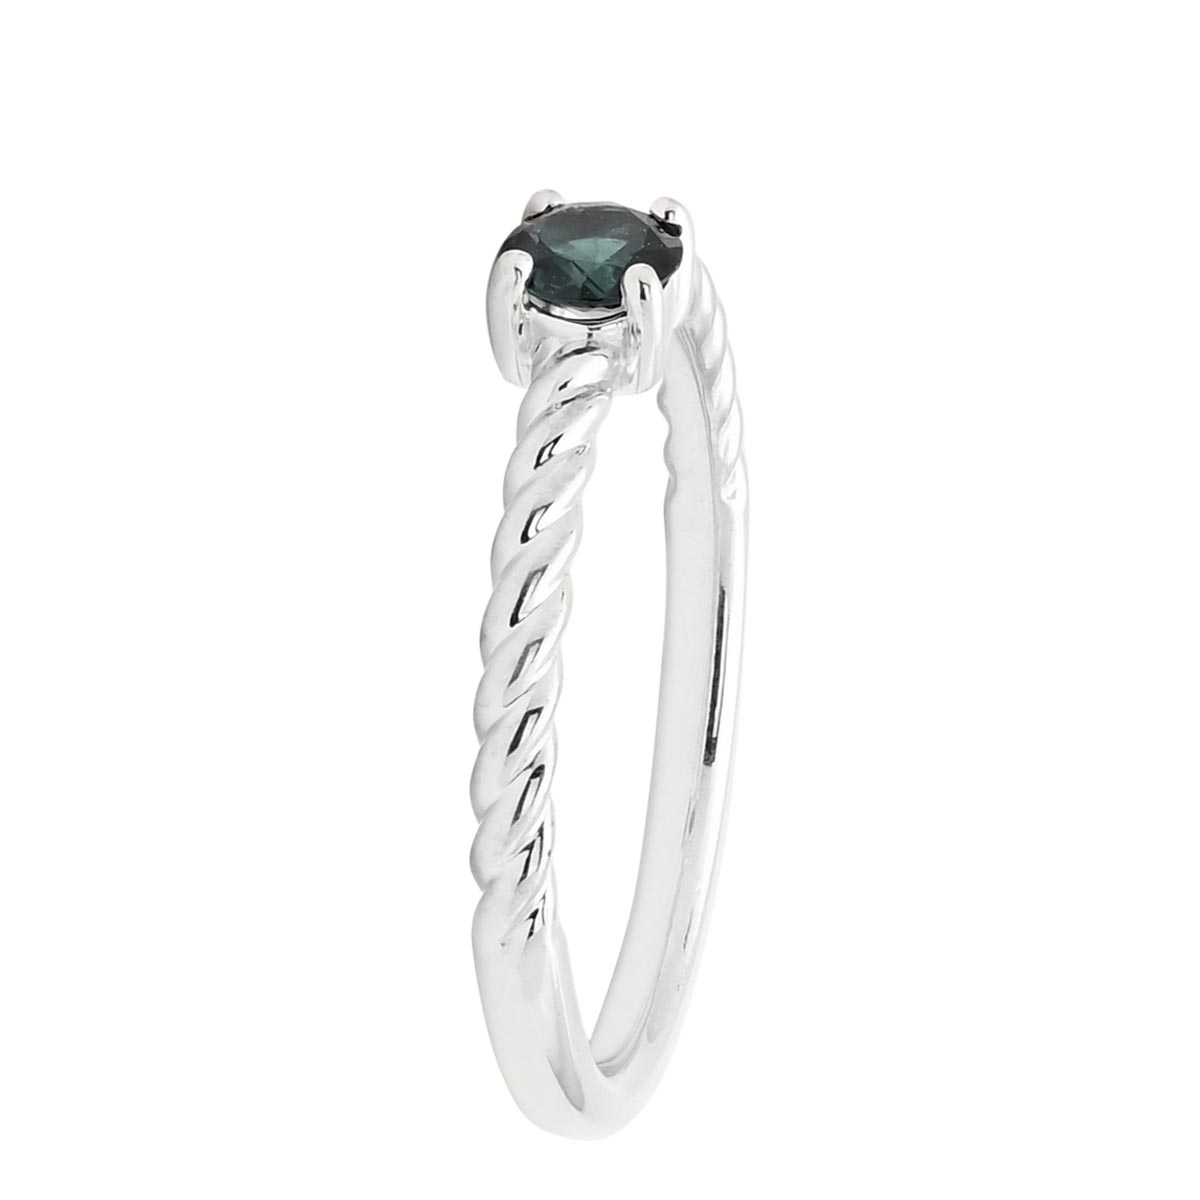 Maine Indicolite Tourmaline Ring in Sterling Silver